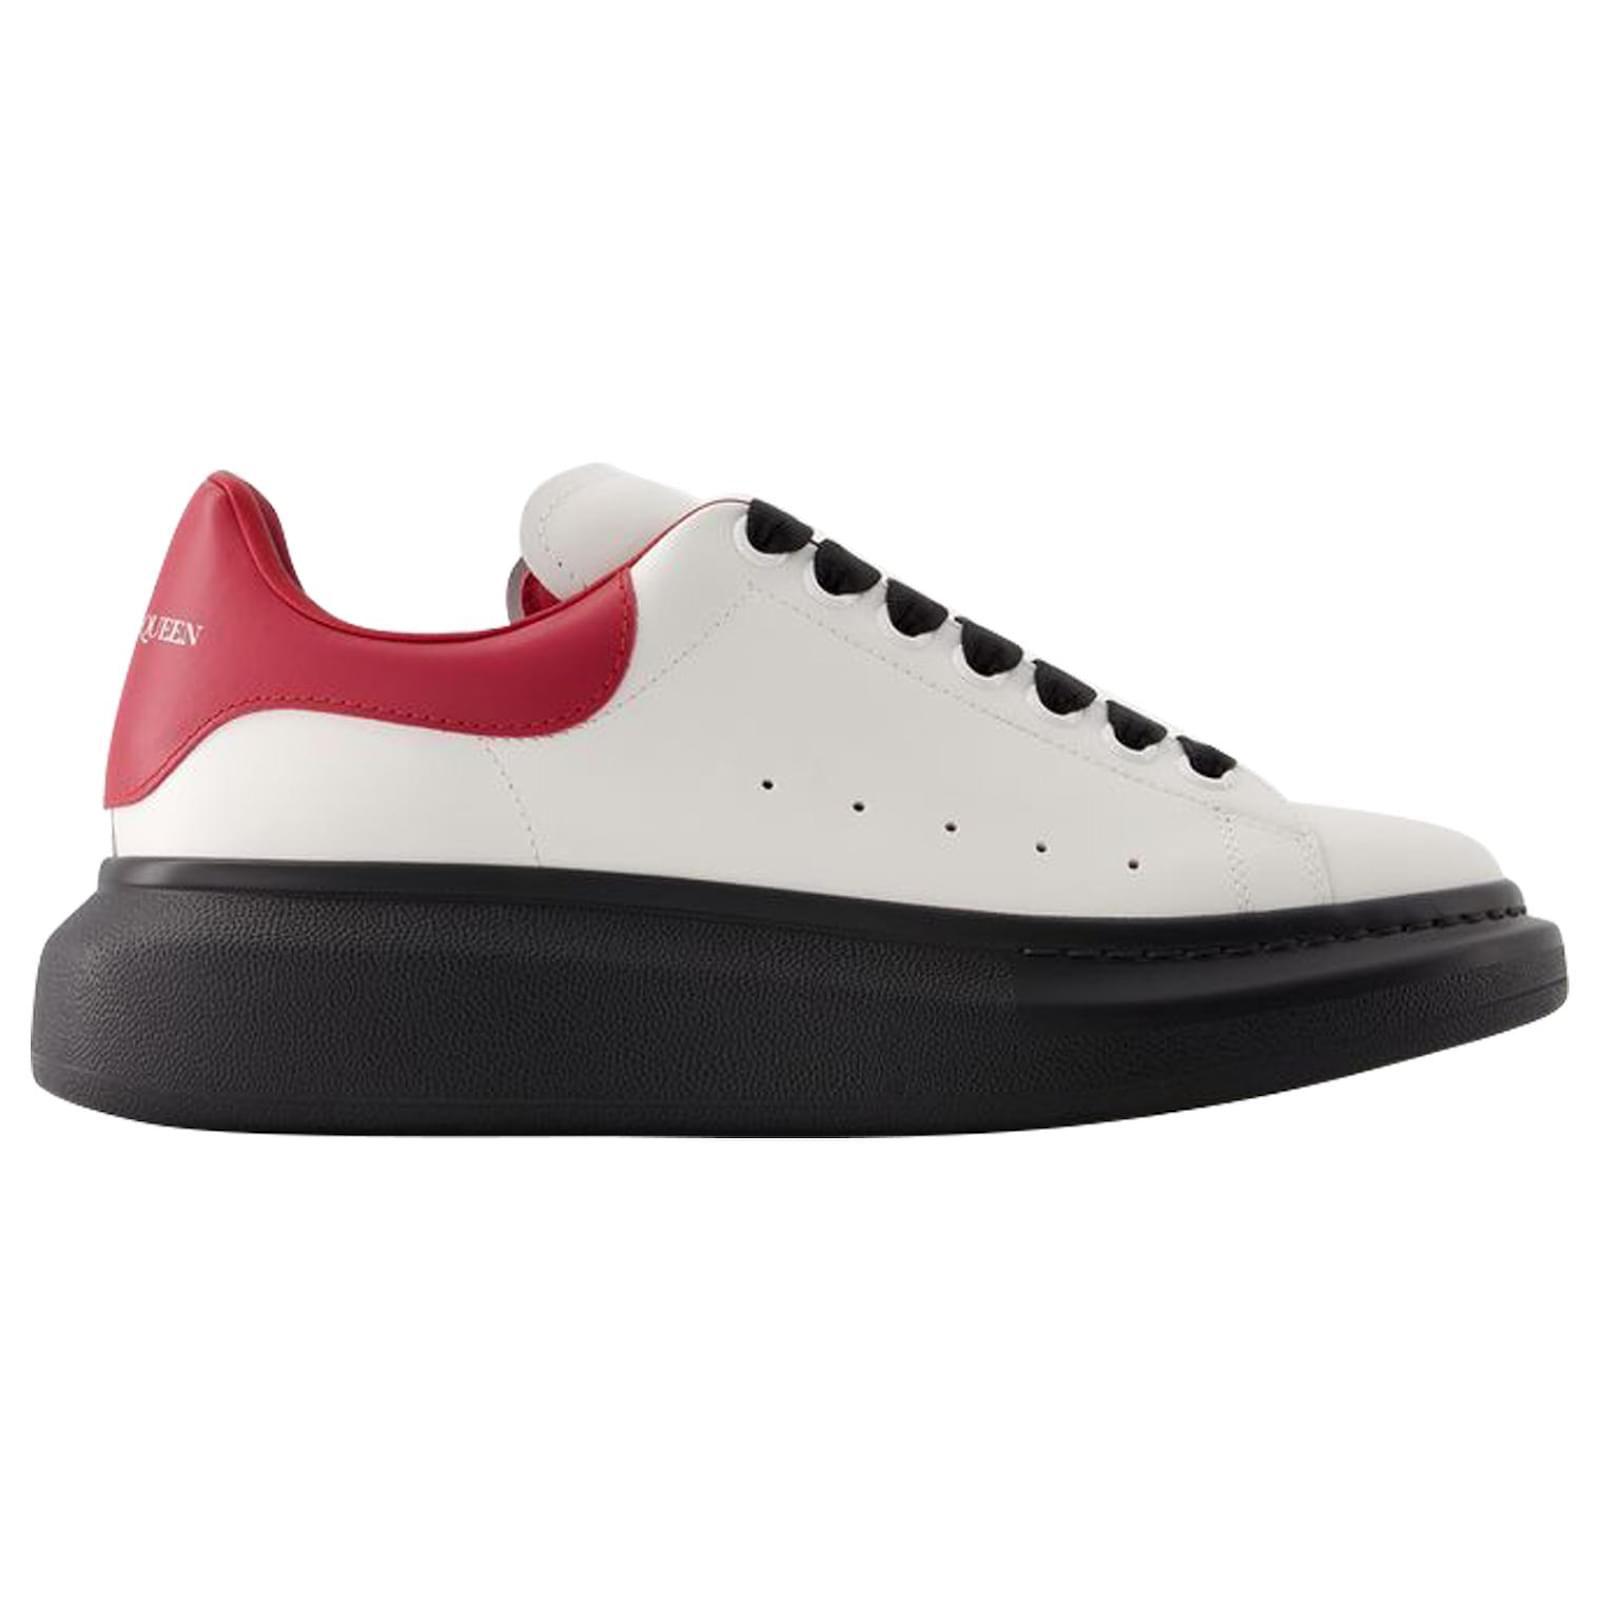 Oversized Sneakers - Alexander McQueen - White - Leather